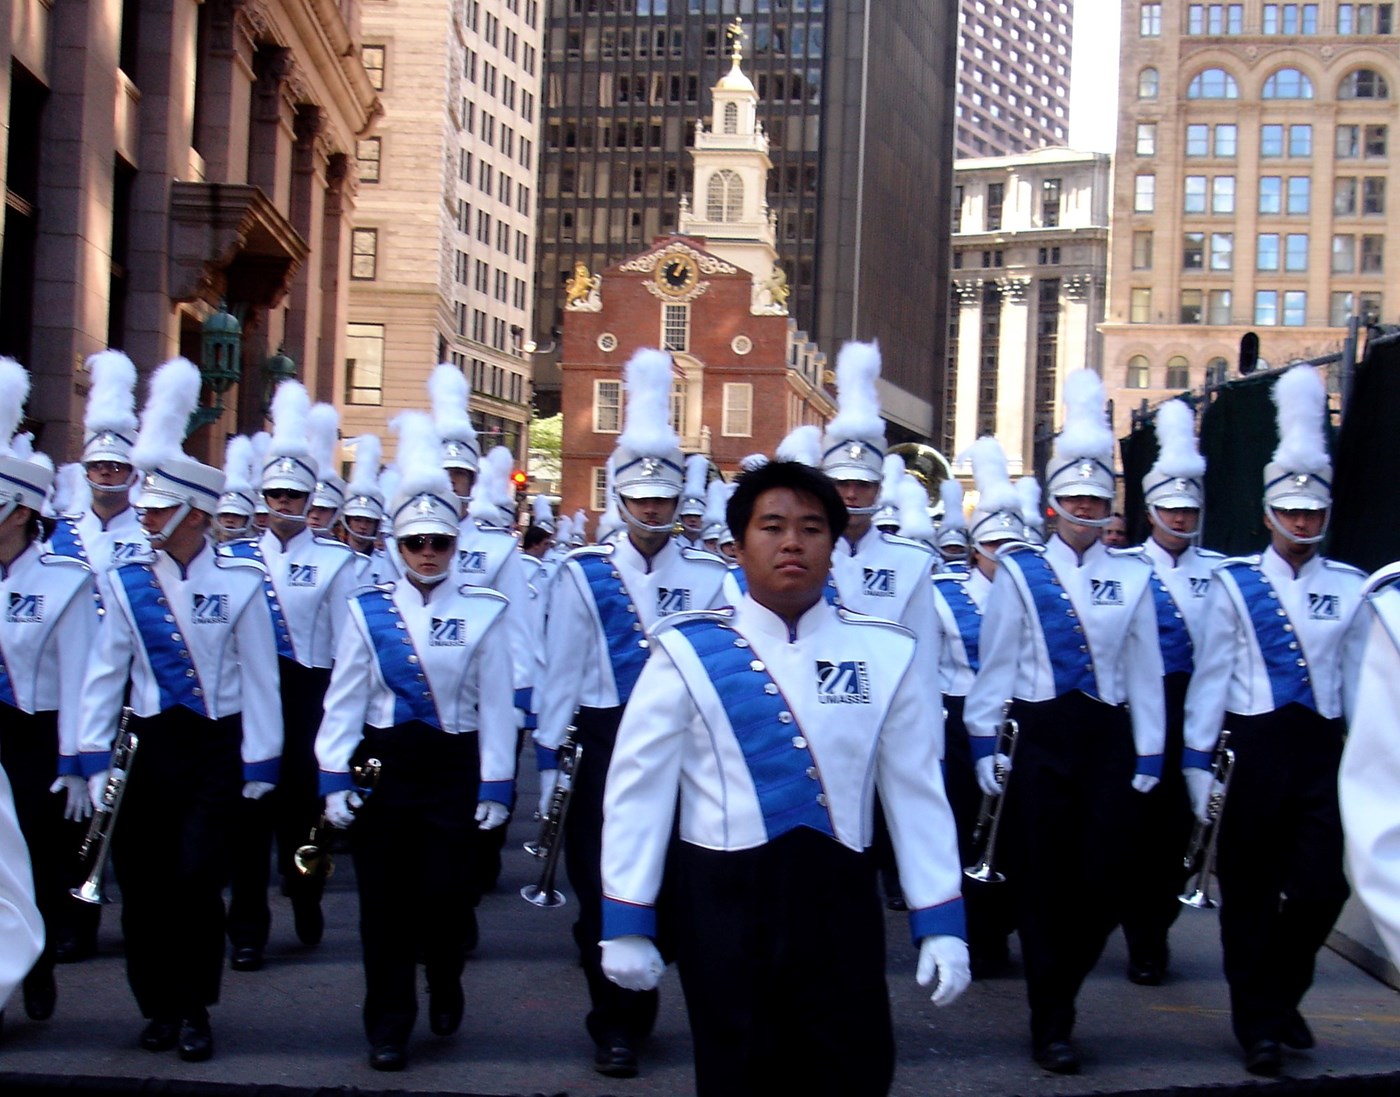 The UMass Lowell Marching Band's iconic photo shows the band in parade formation in Boston, marching in their white uniform tops with royal blue sash, lead by their Asian student field conductor.